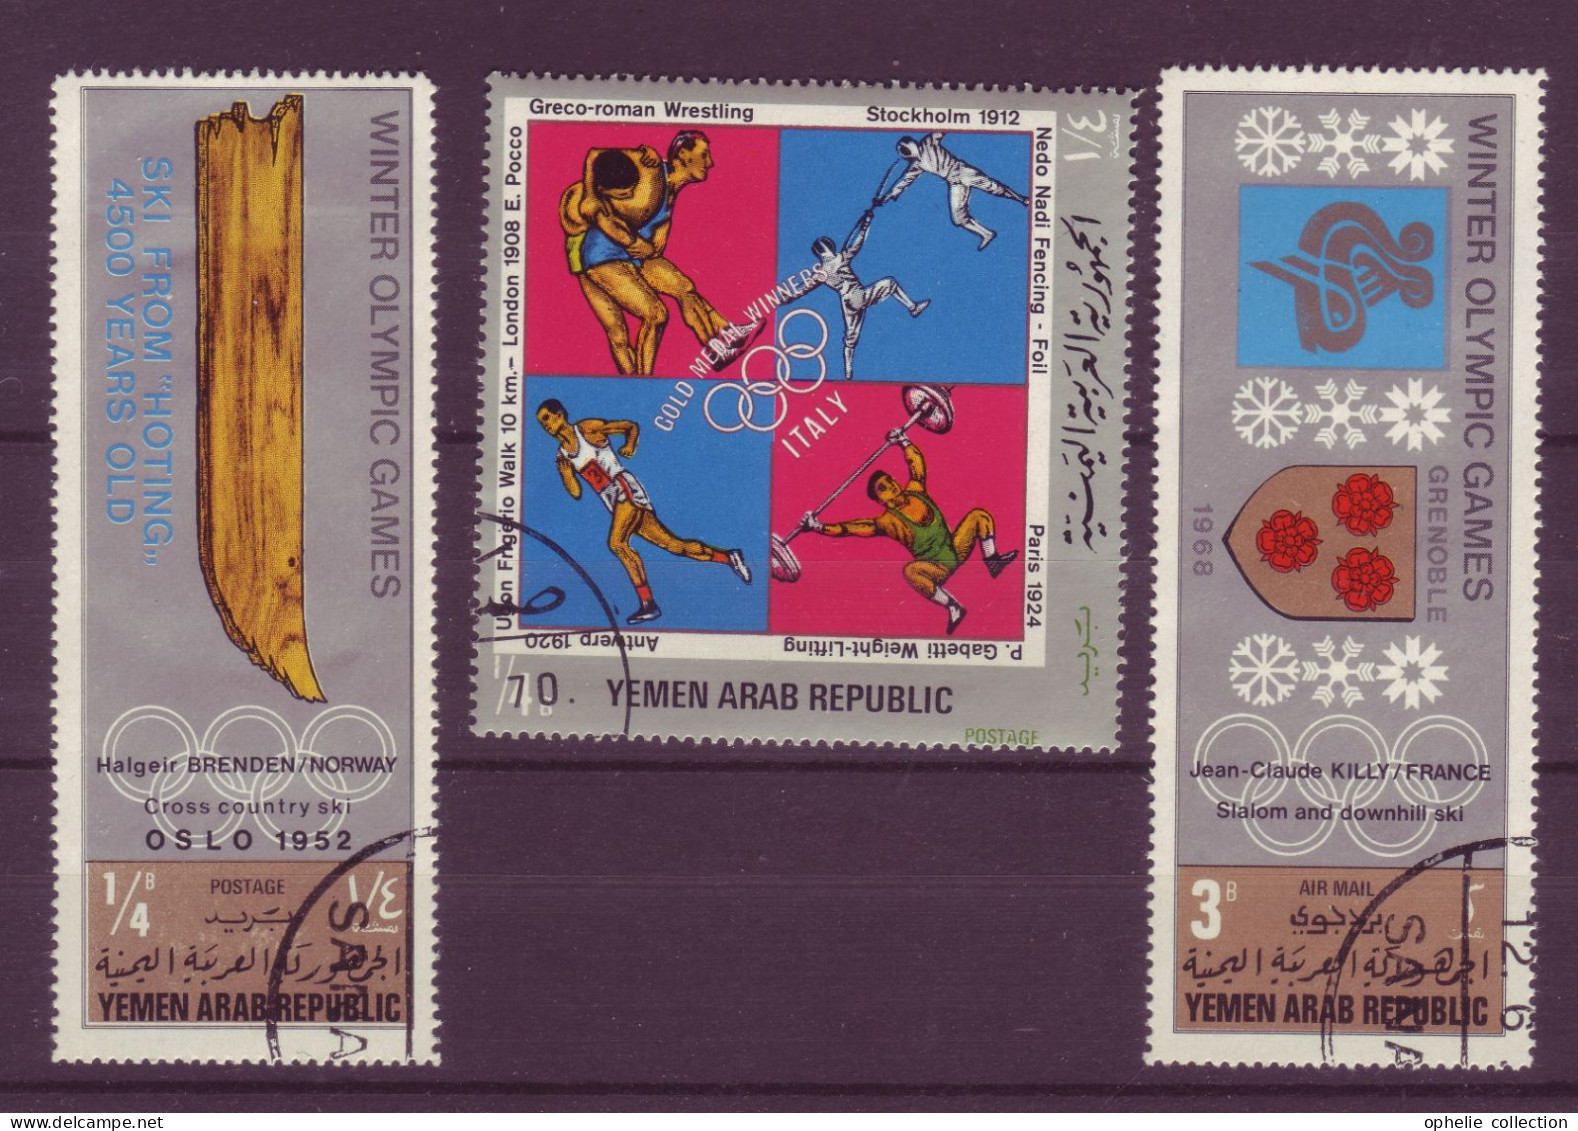 Asie - Yemen - Olympic Games - 3 Timbres Différents - 6853 - Yemen